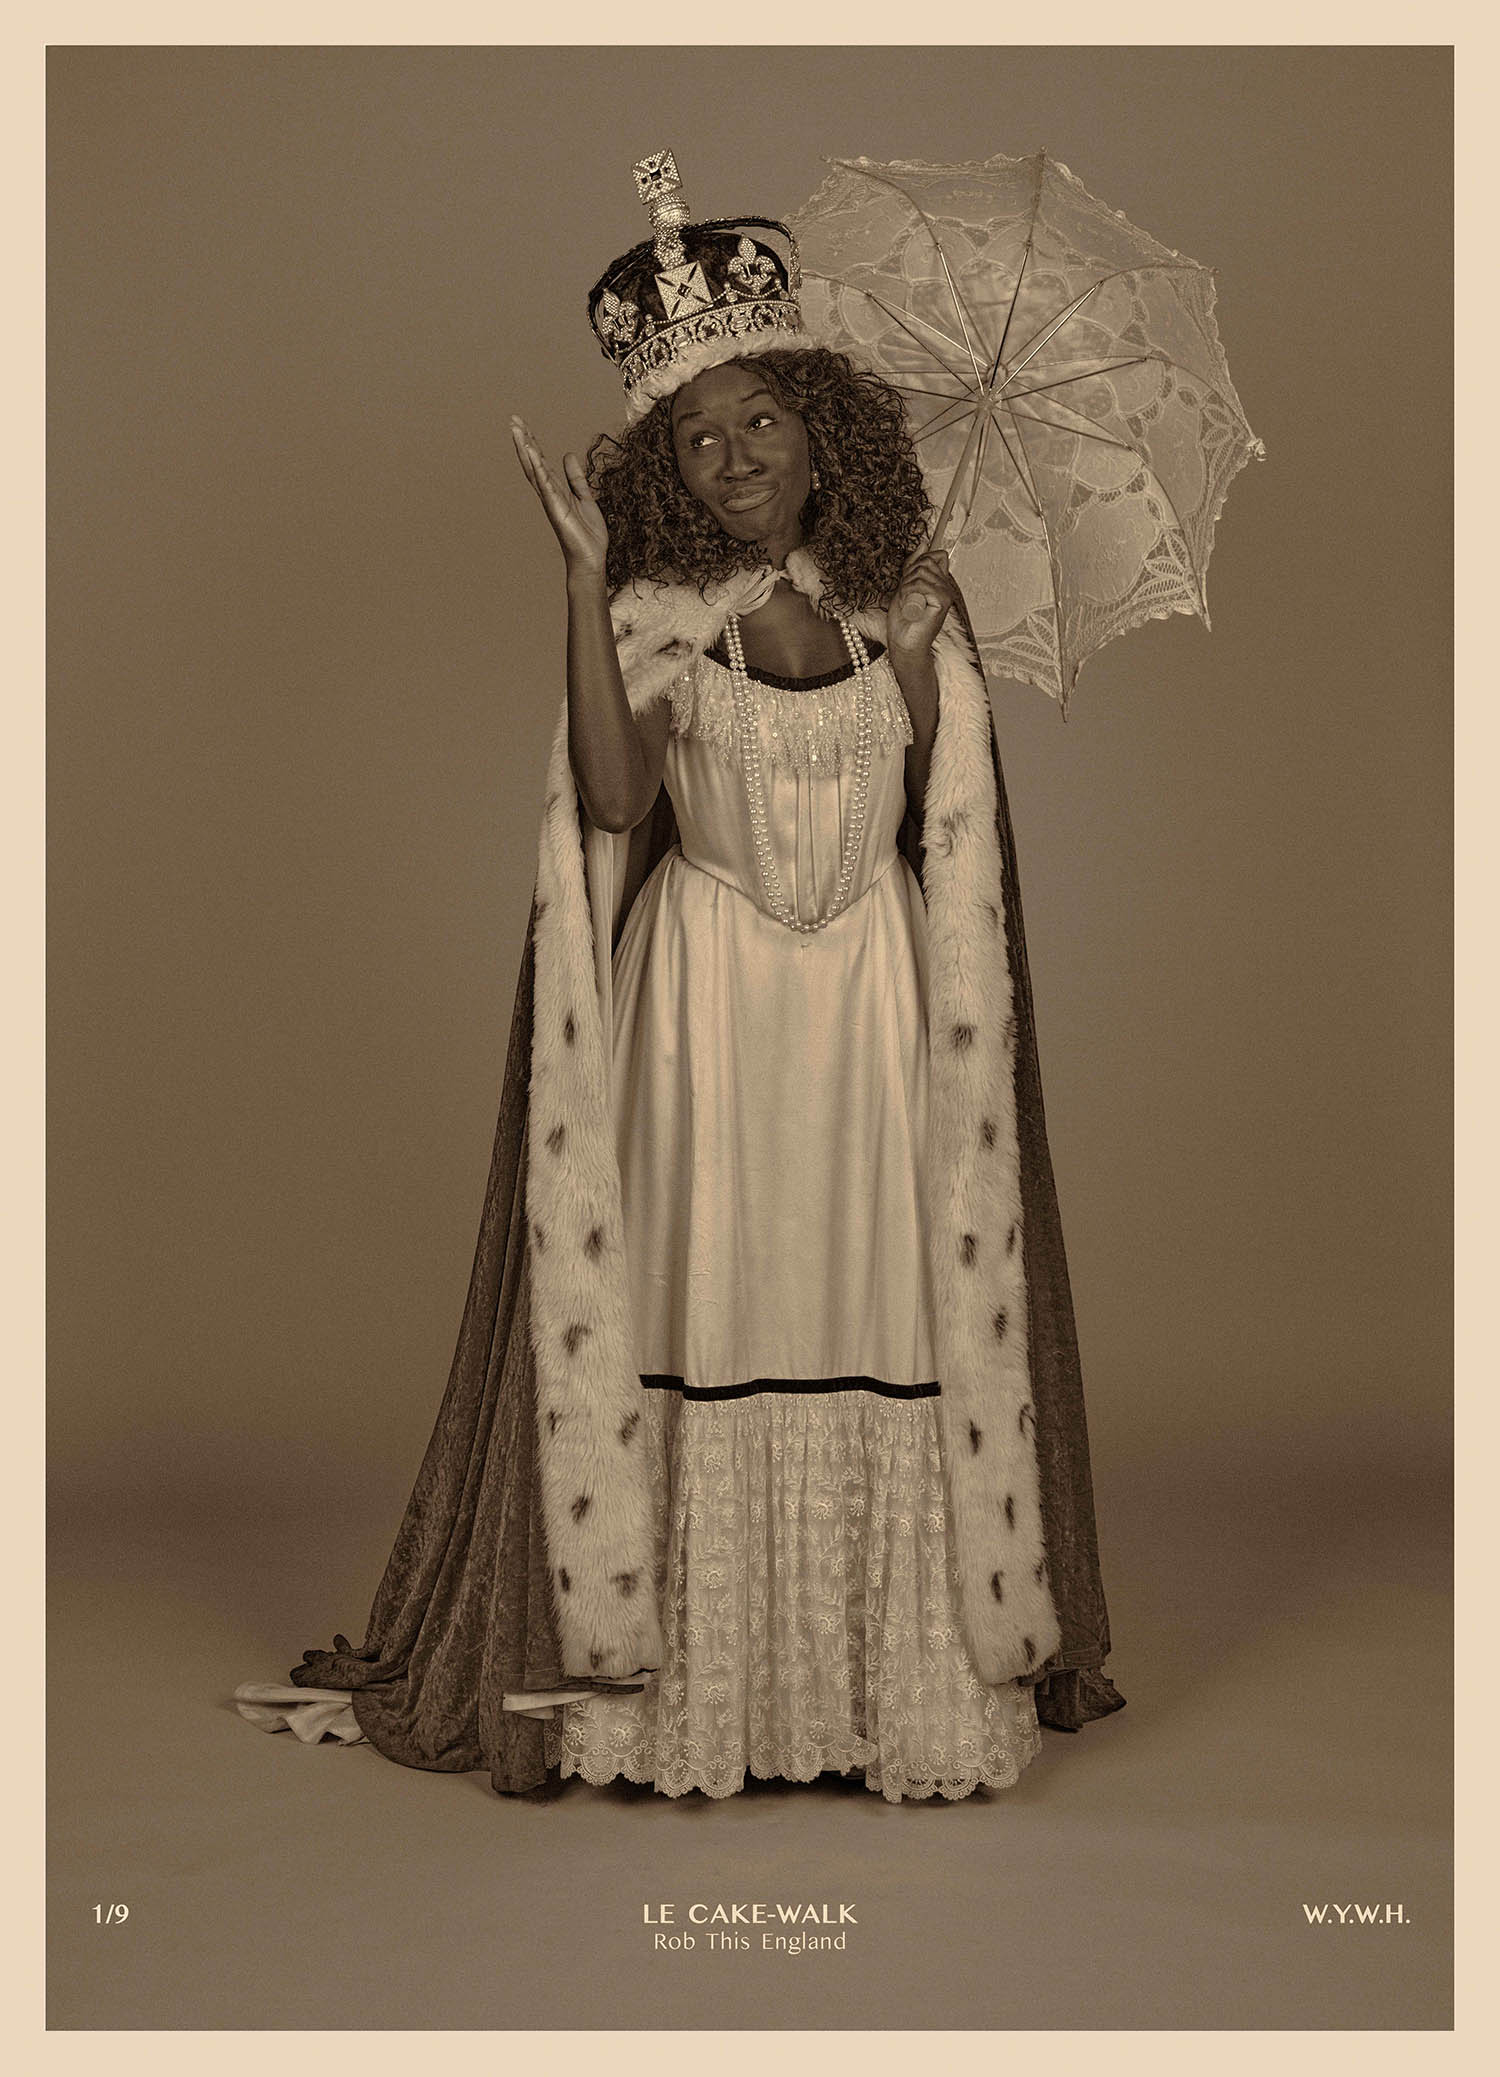 In 1902, a Black Performer Took the World by Storm. Her Story Resonates Today.